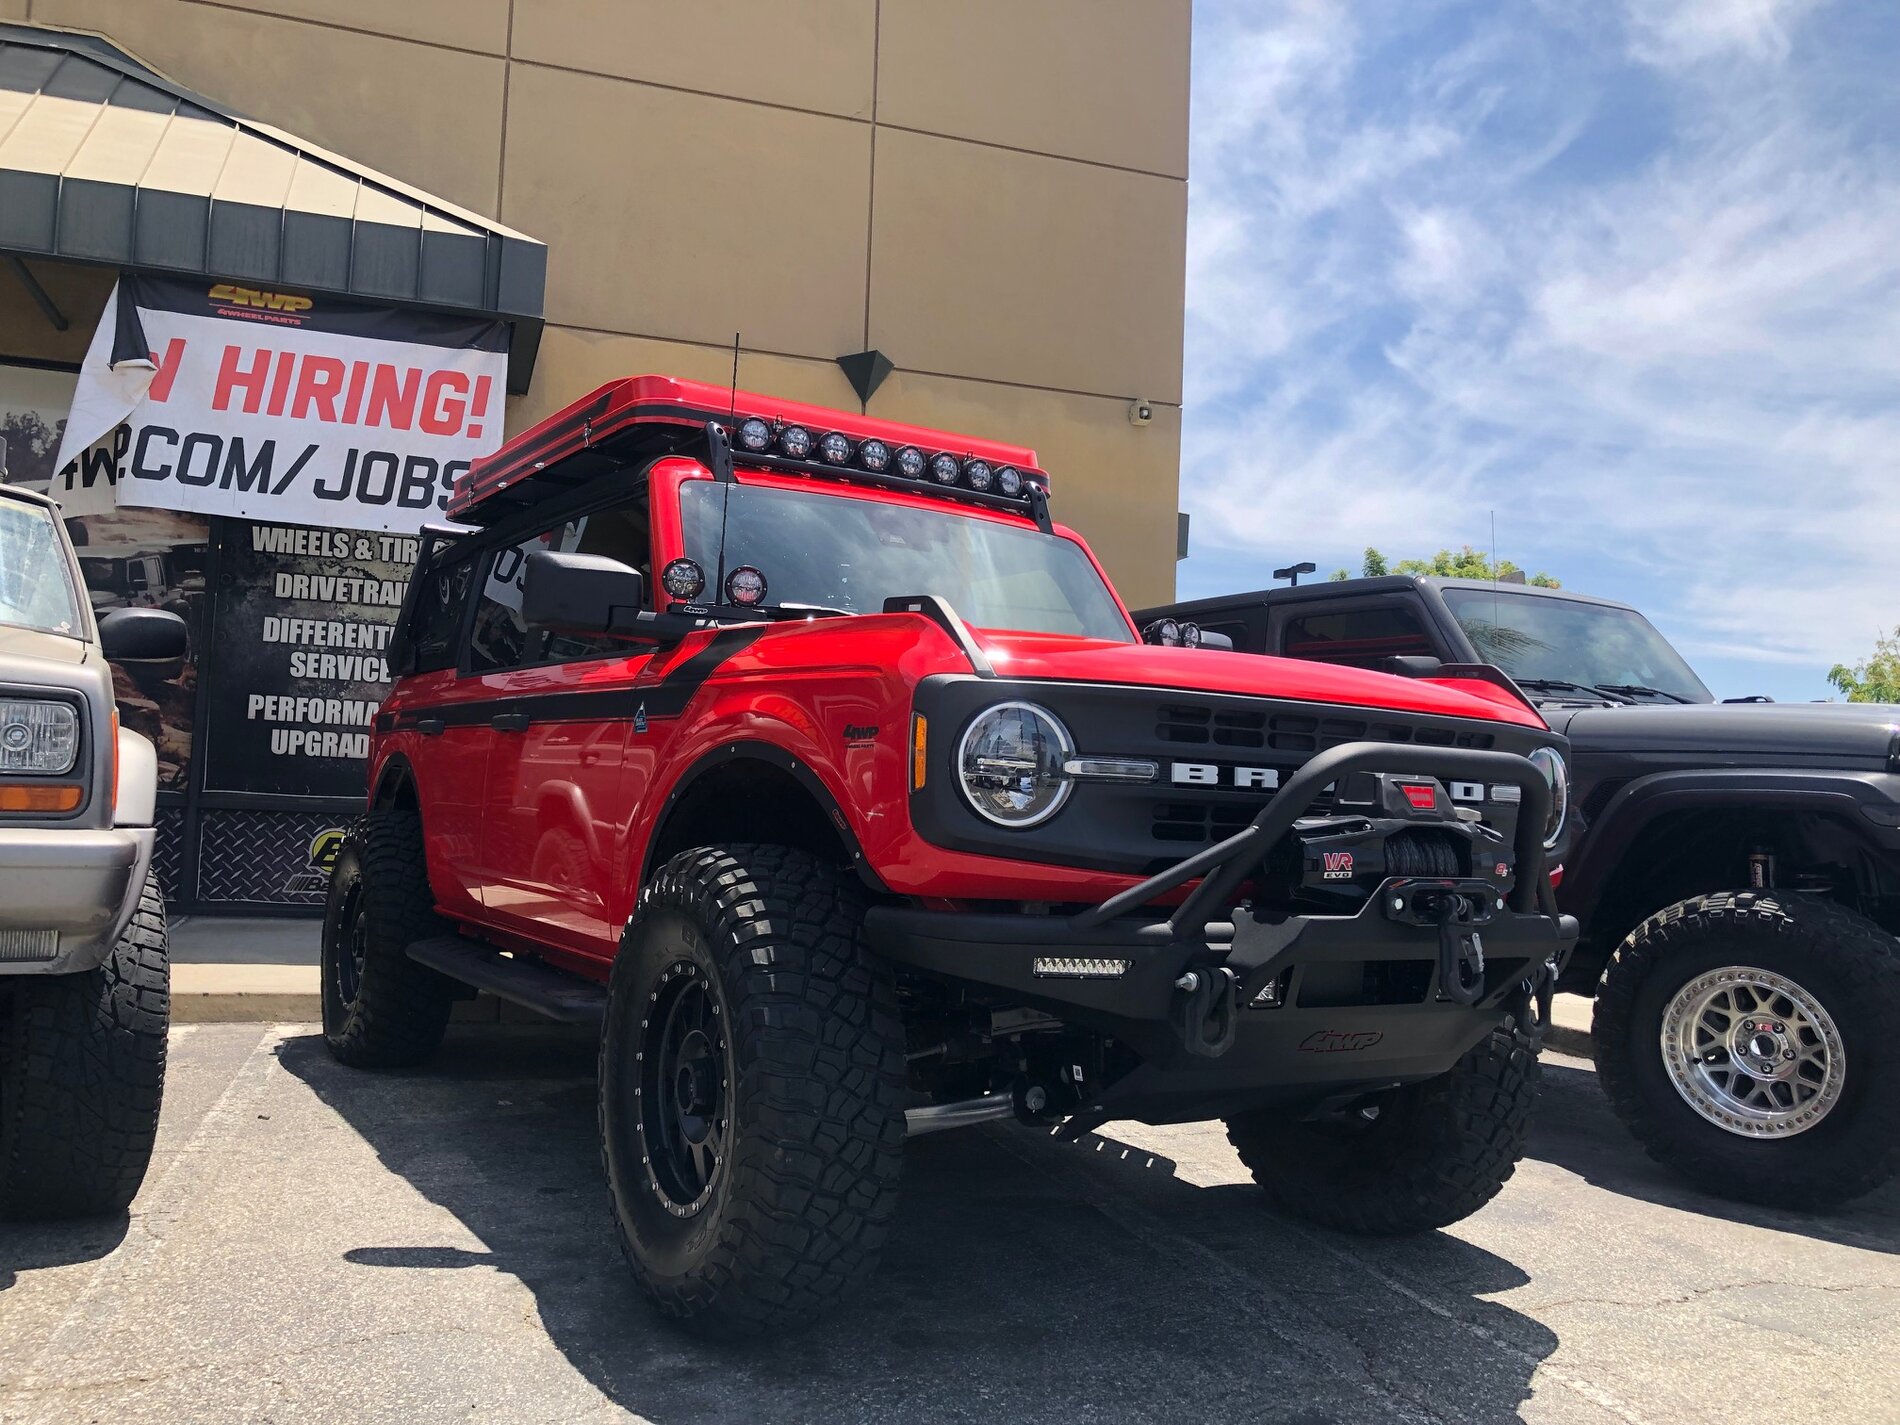 Ford Bronco 🔥🚨Update: Flash Display of the 4WPs Bronco: West Covina Noon to 2pm (Rest of locations in comments) IMG_7242